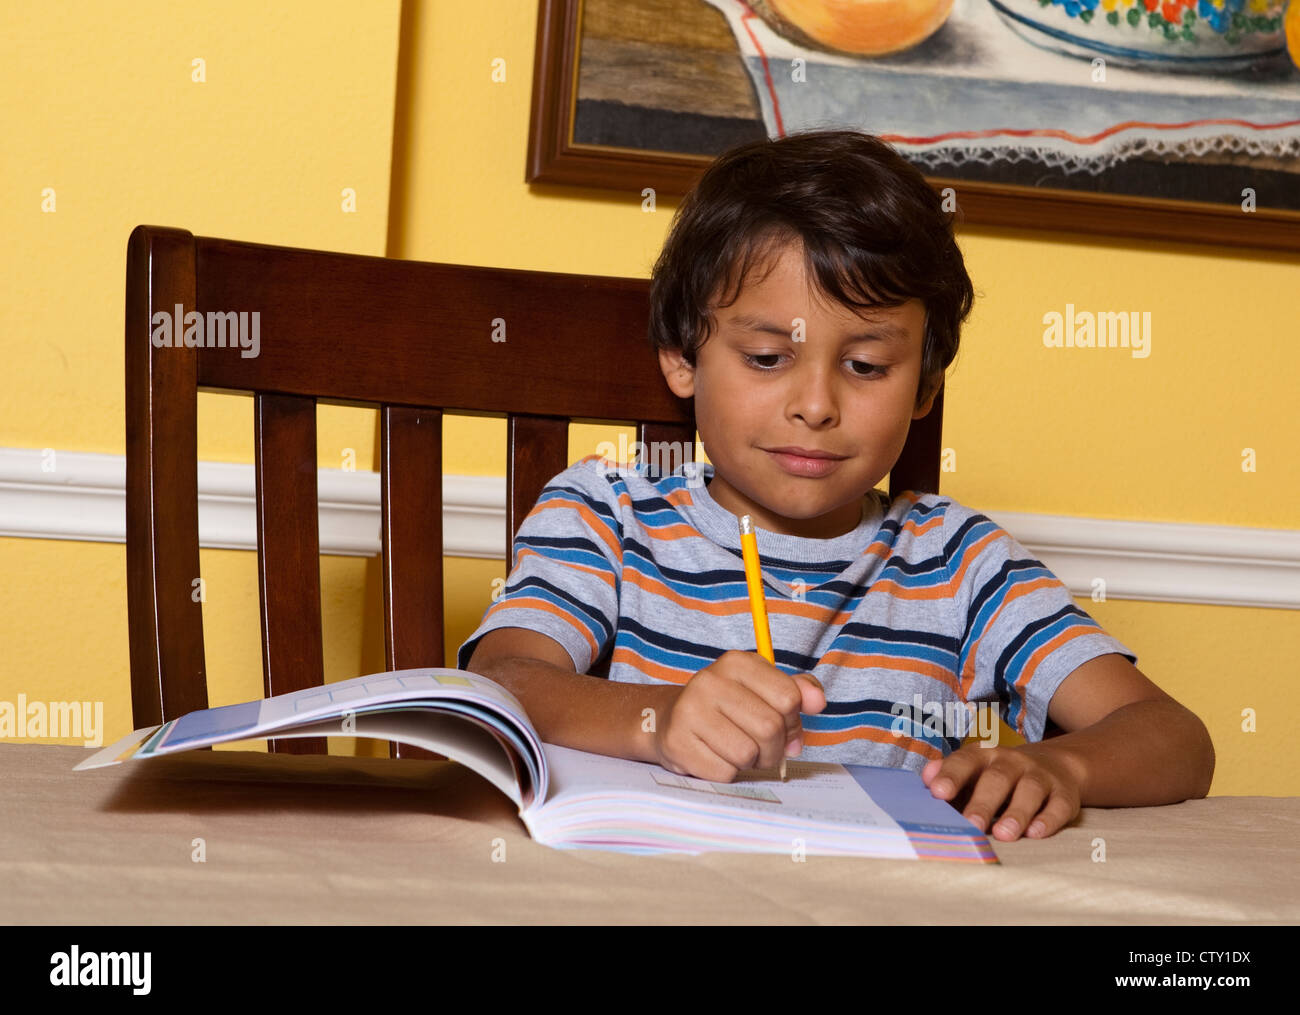 Mexican-American 8 year old elementary school age boy does school second grade homework at home writing, using pencil Stock Photo